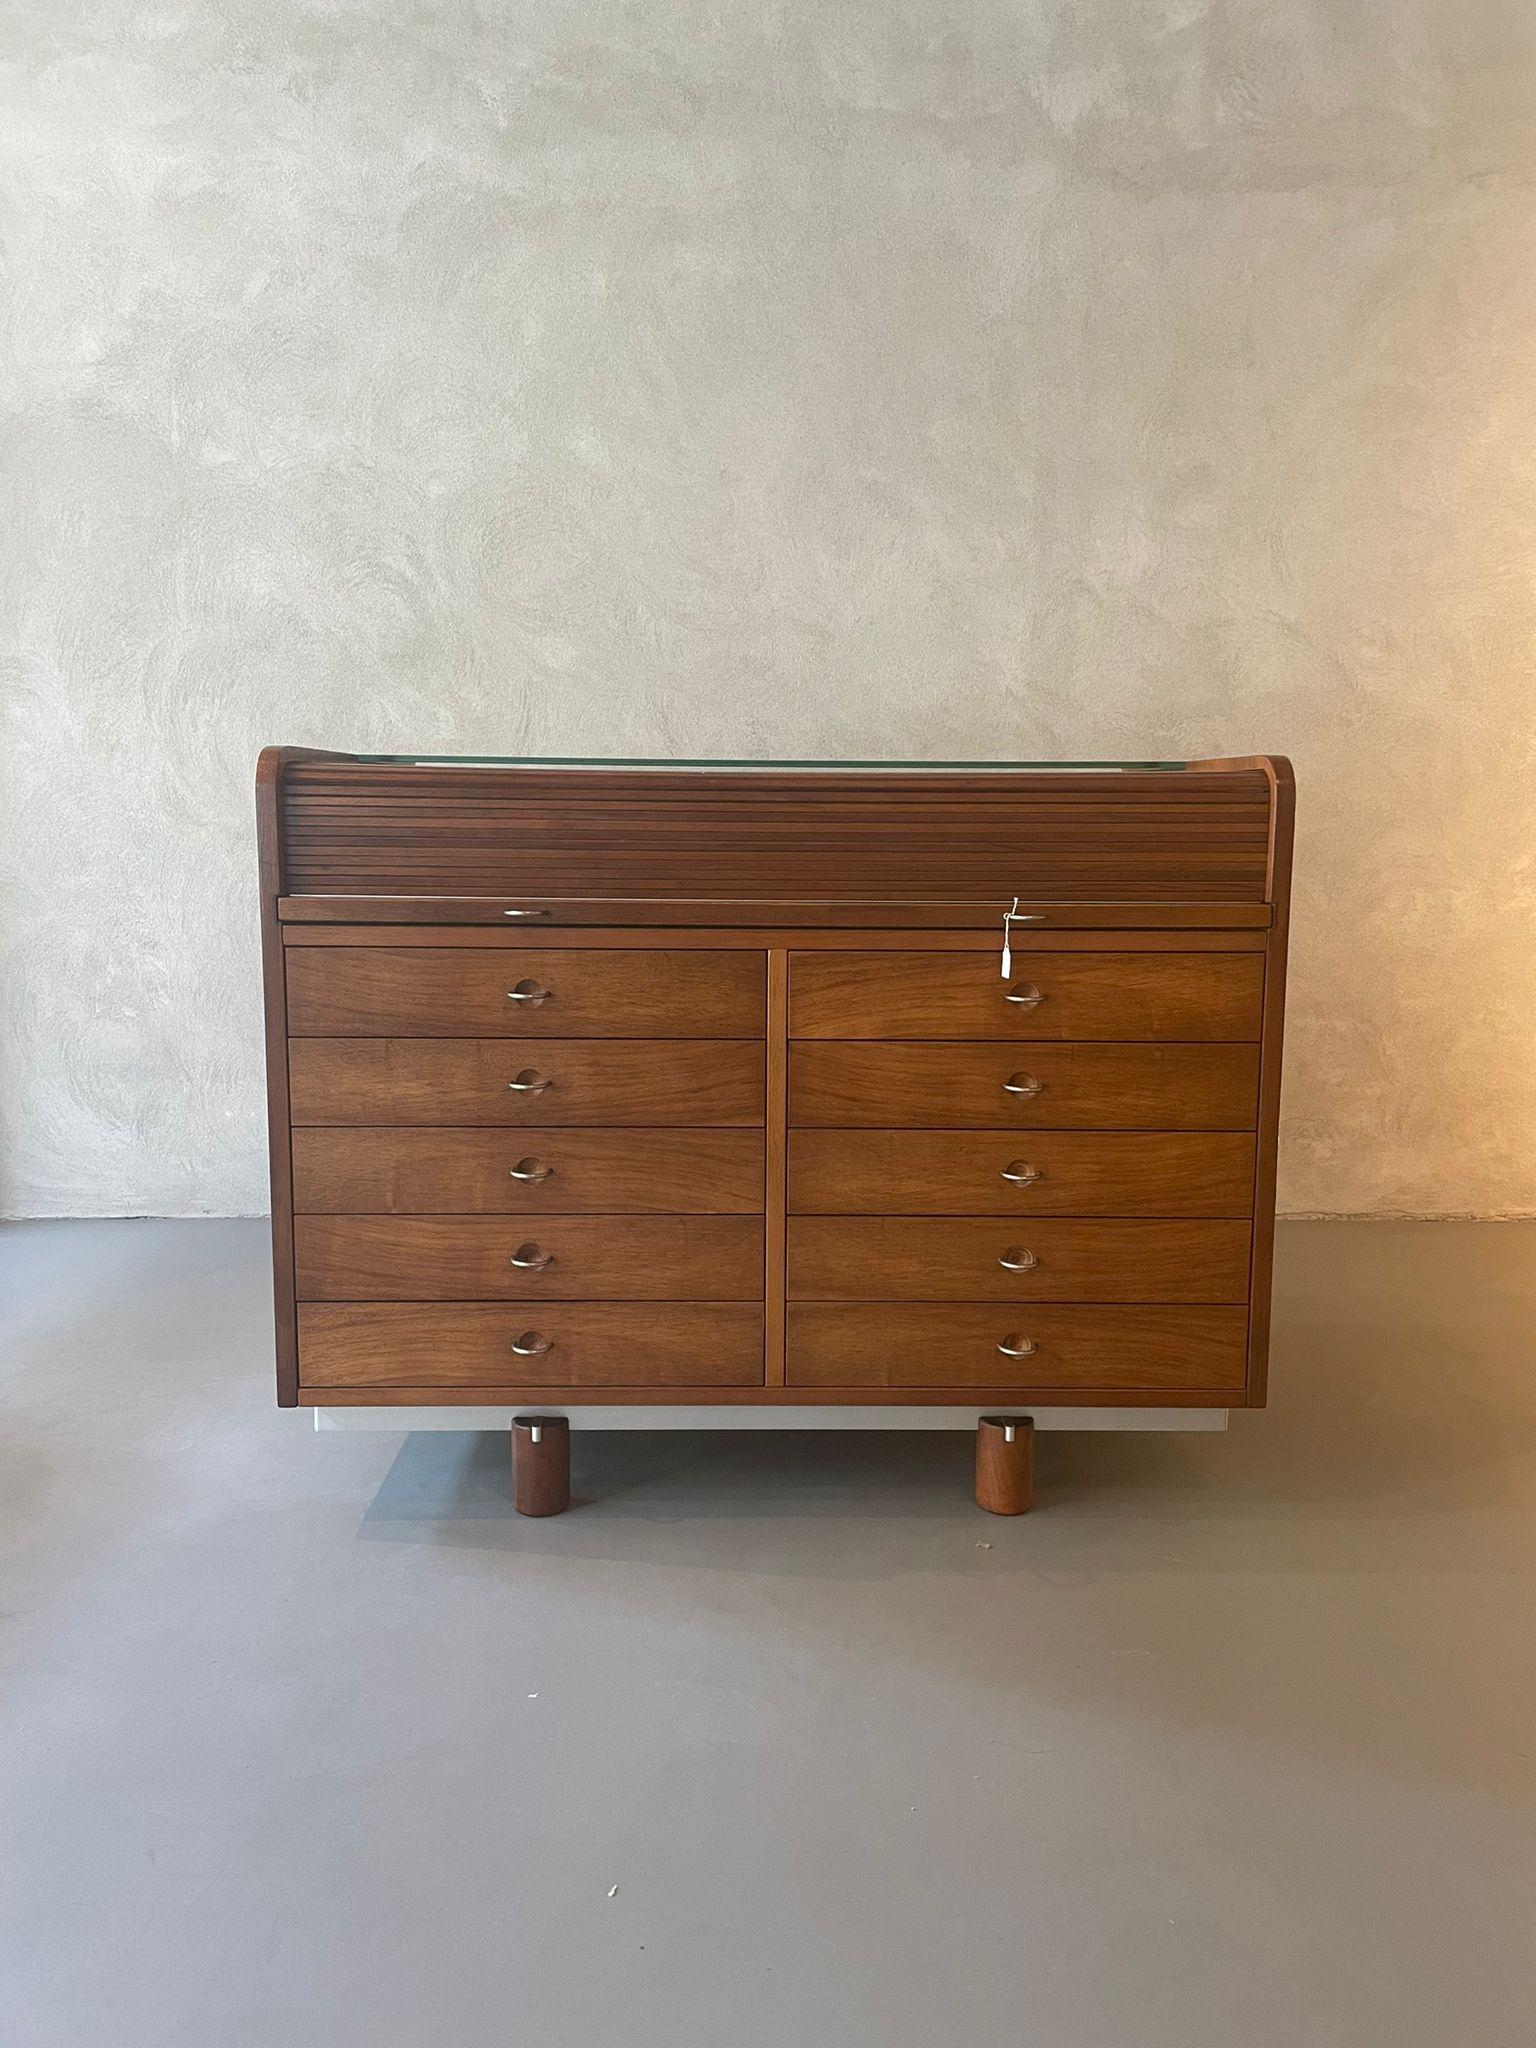 Secretaire roll top nr. 804 designed by Gianfranco Frattini for Bernini in Italy, 1960s.
The self-supporting roll-top secretary in walnut wood characterized by many drawers could make it functional, even if apparently it can only act as a chest of